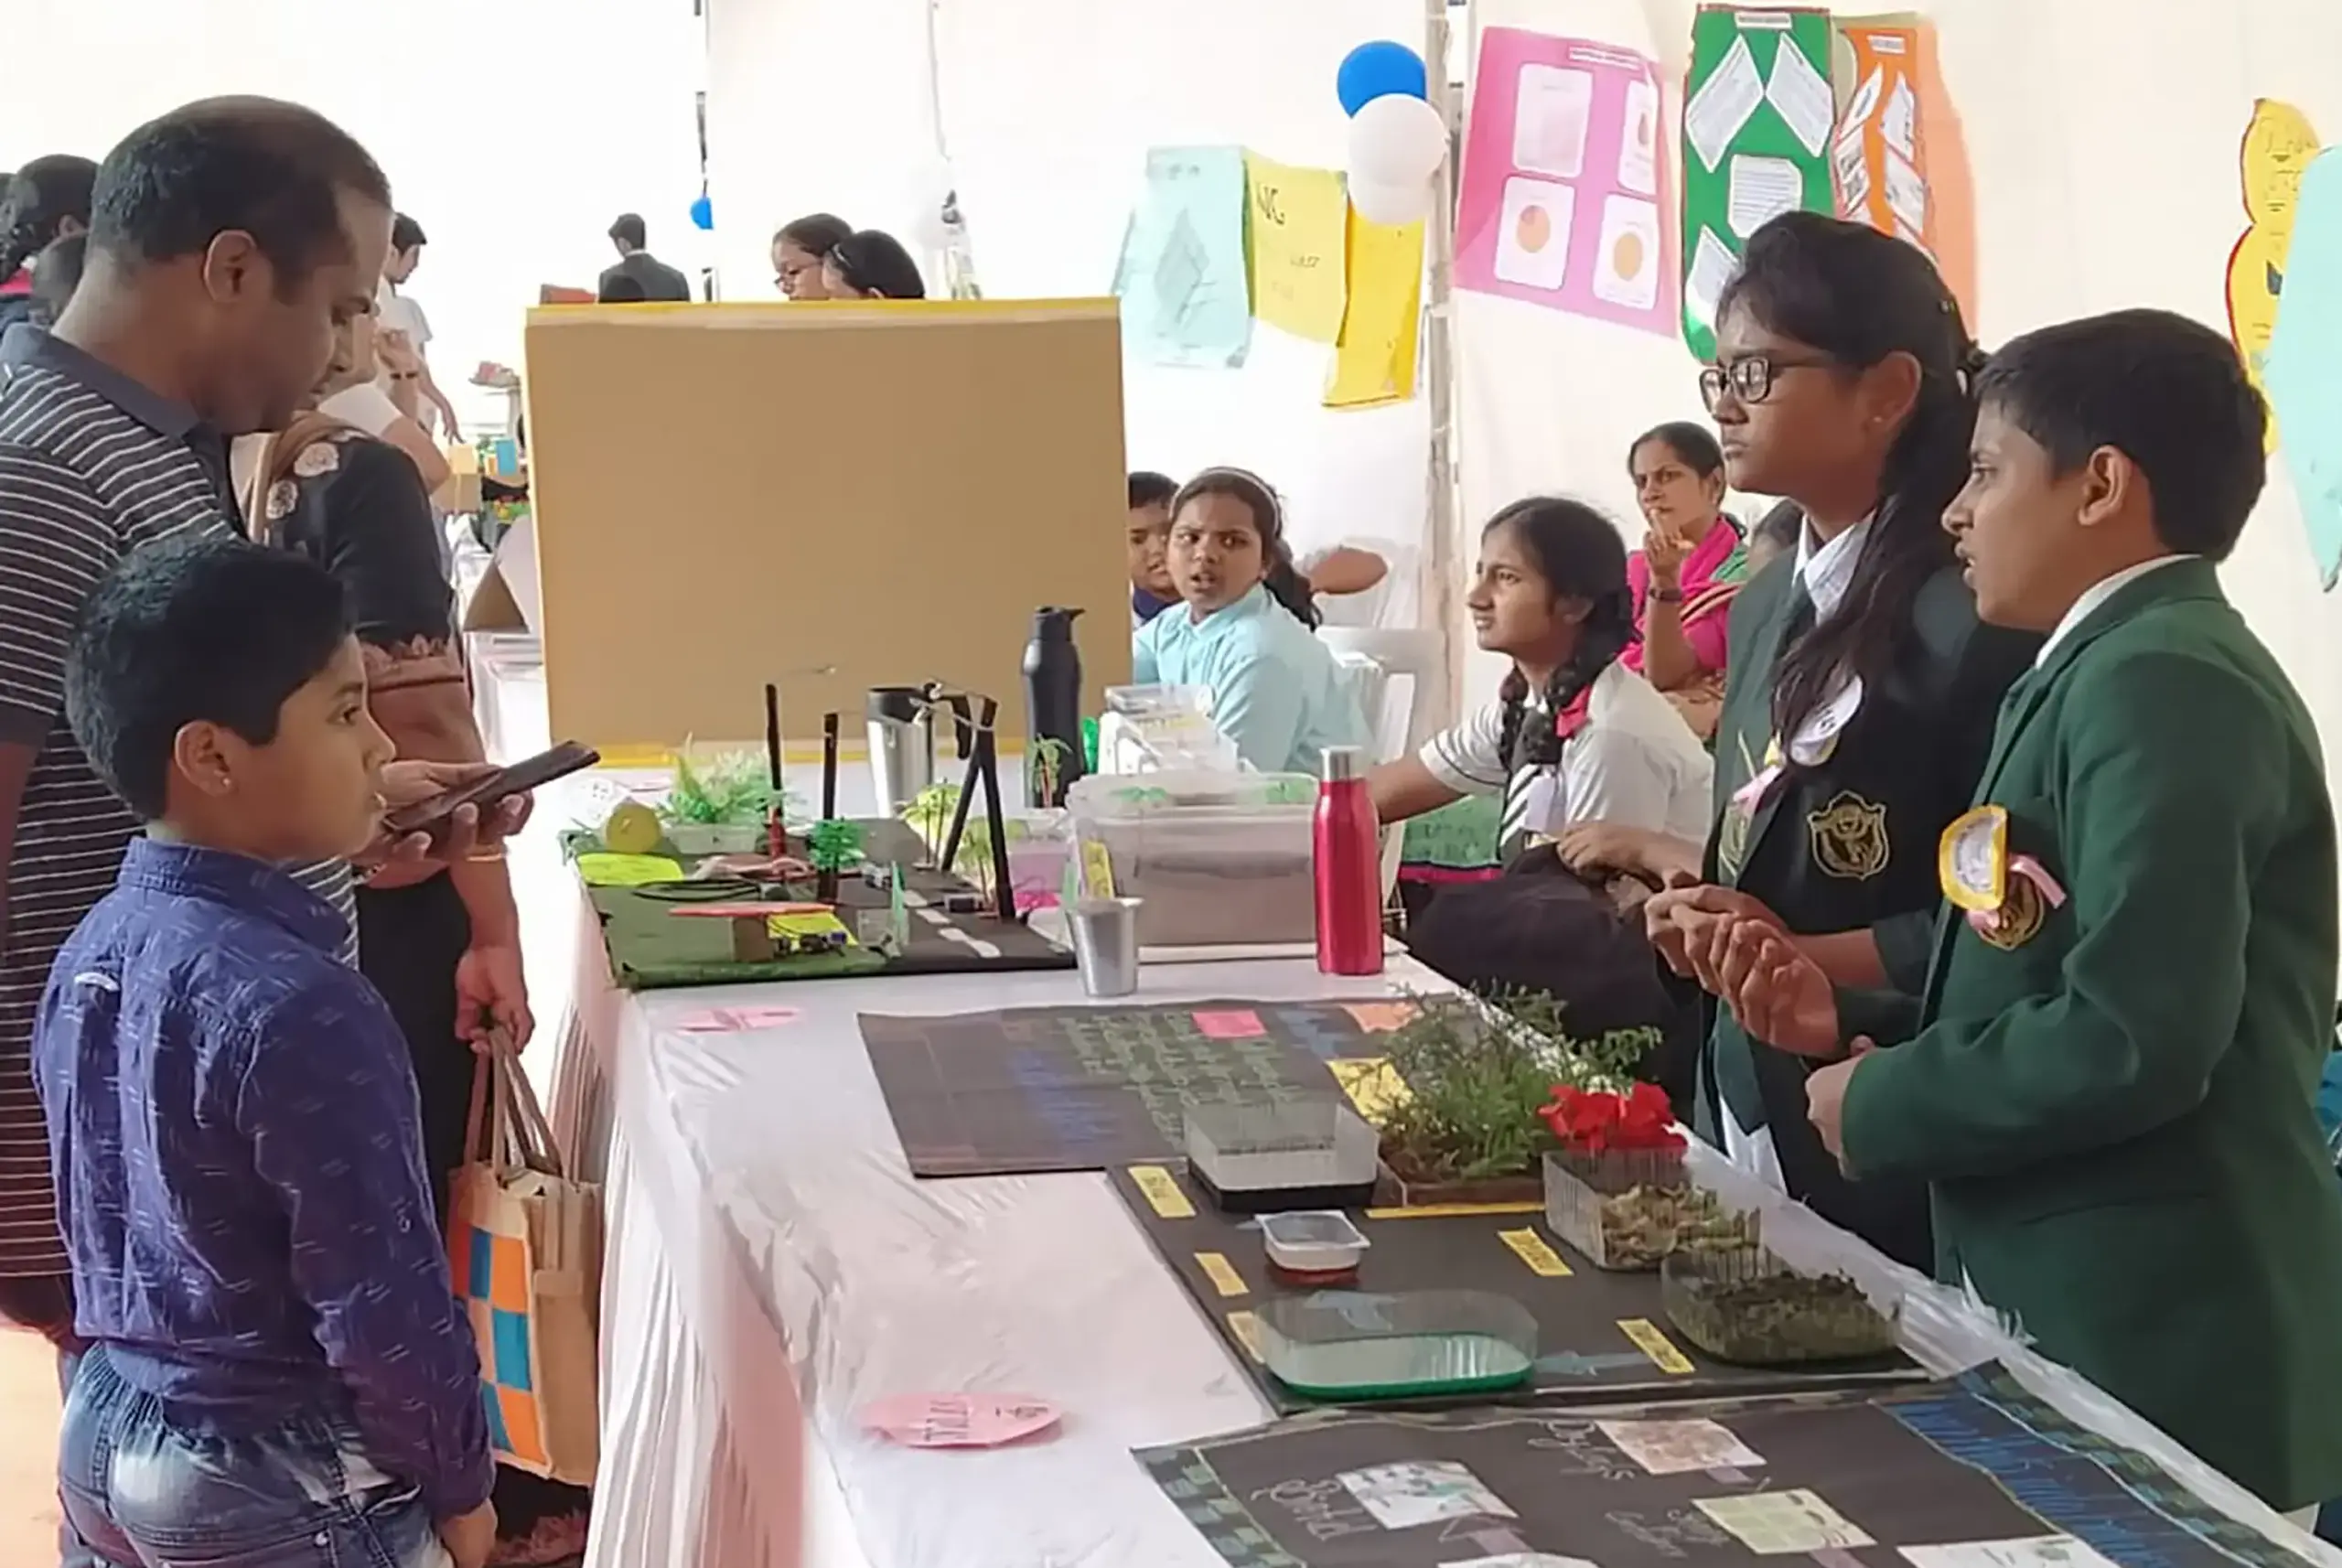 Students of DPS Warangal displaying their projects during exhibition.